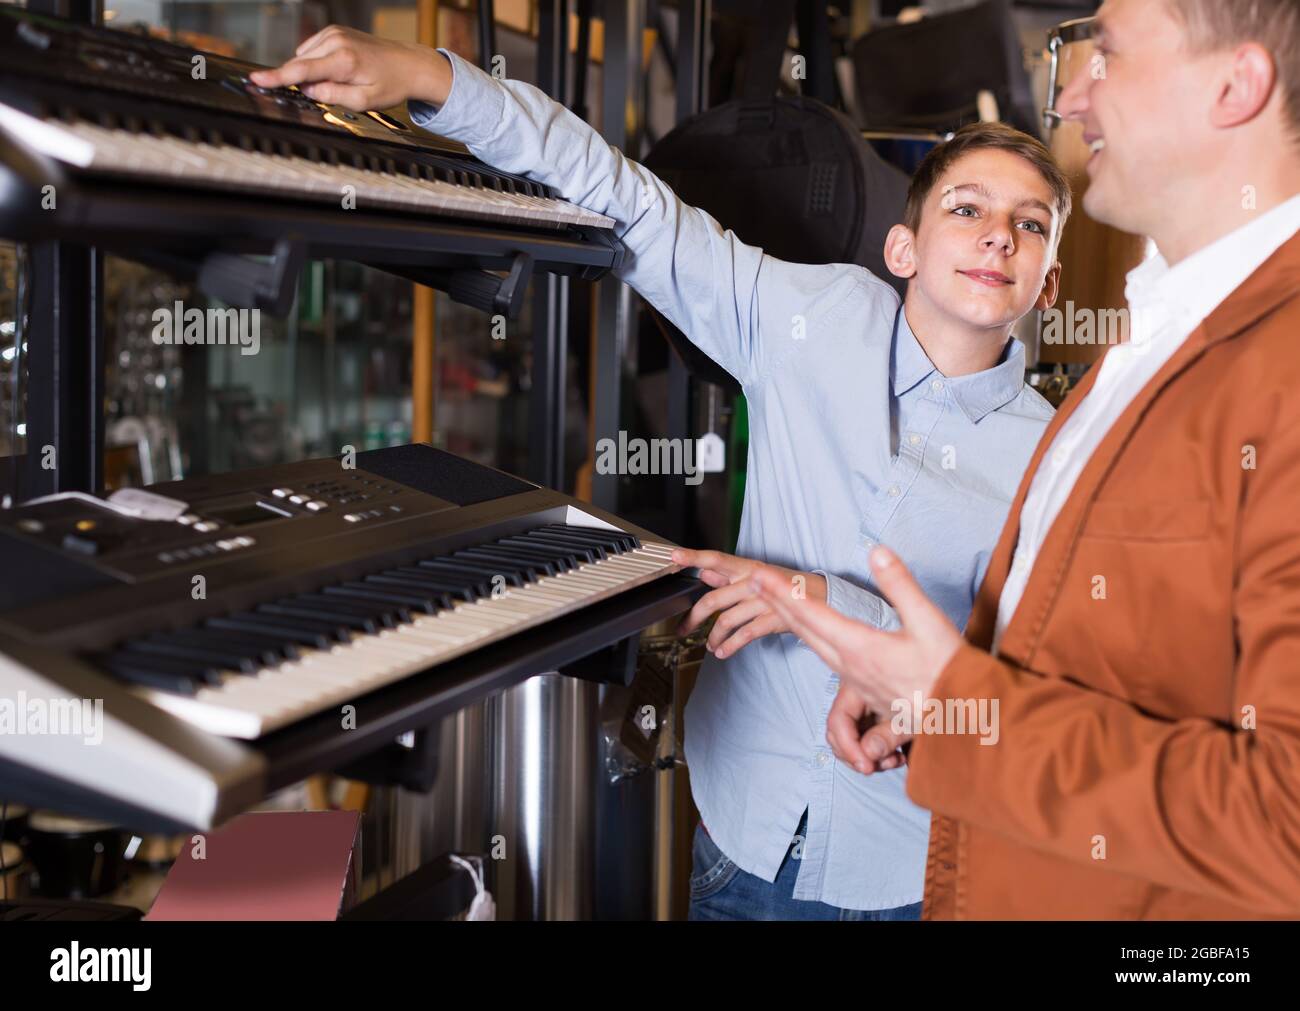 Boy with father looking at synthesizers Stock Photo